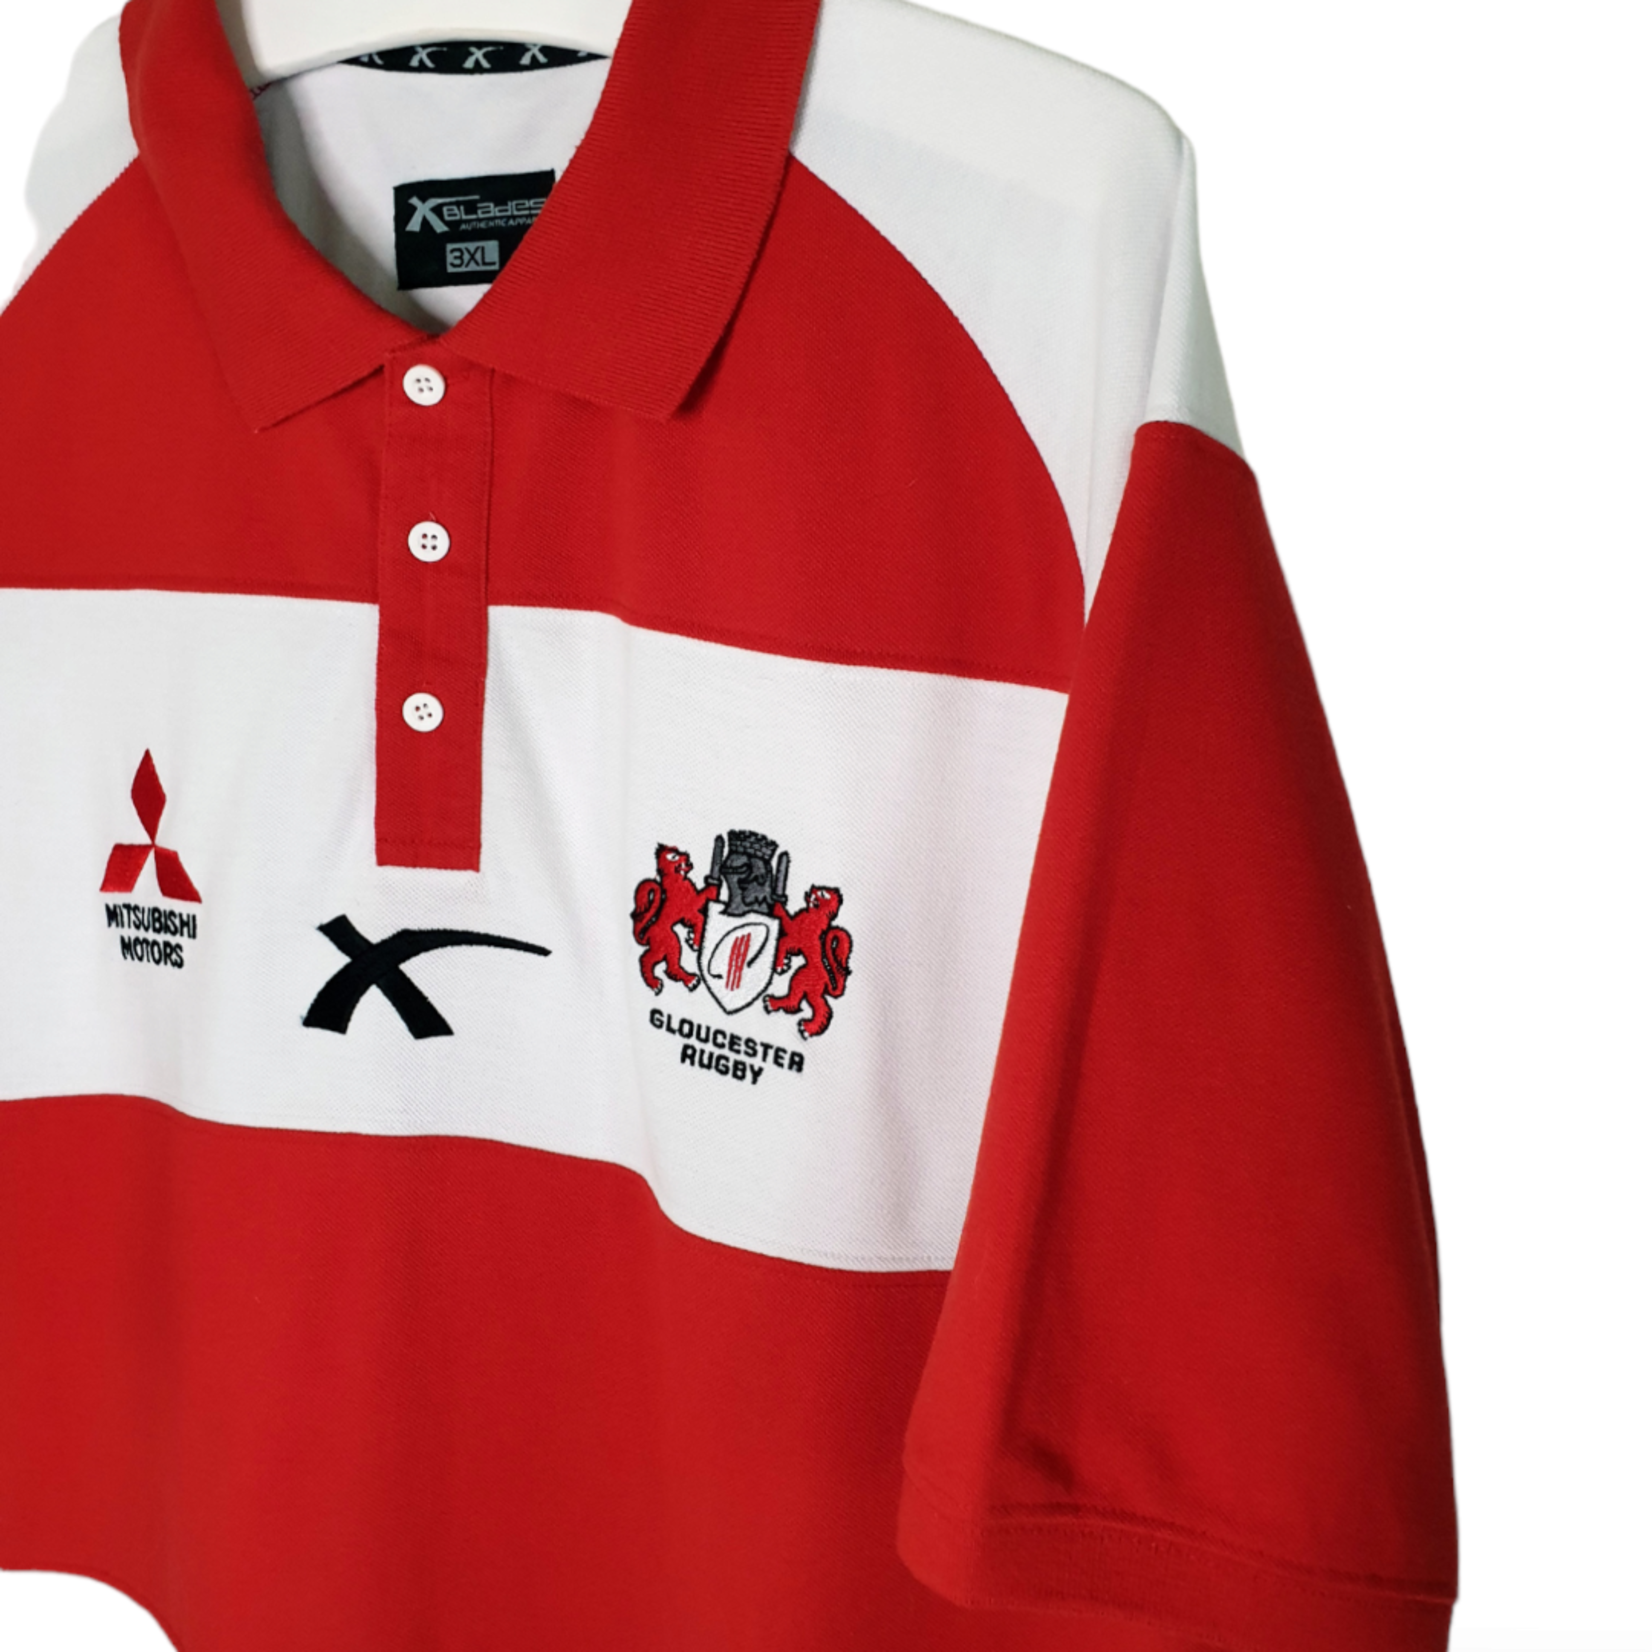 Xblades Original Xblades vintage rugby polo Gloucester rugby